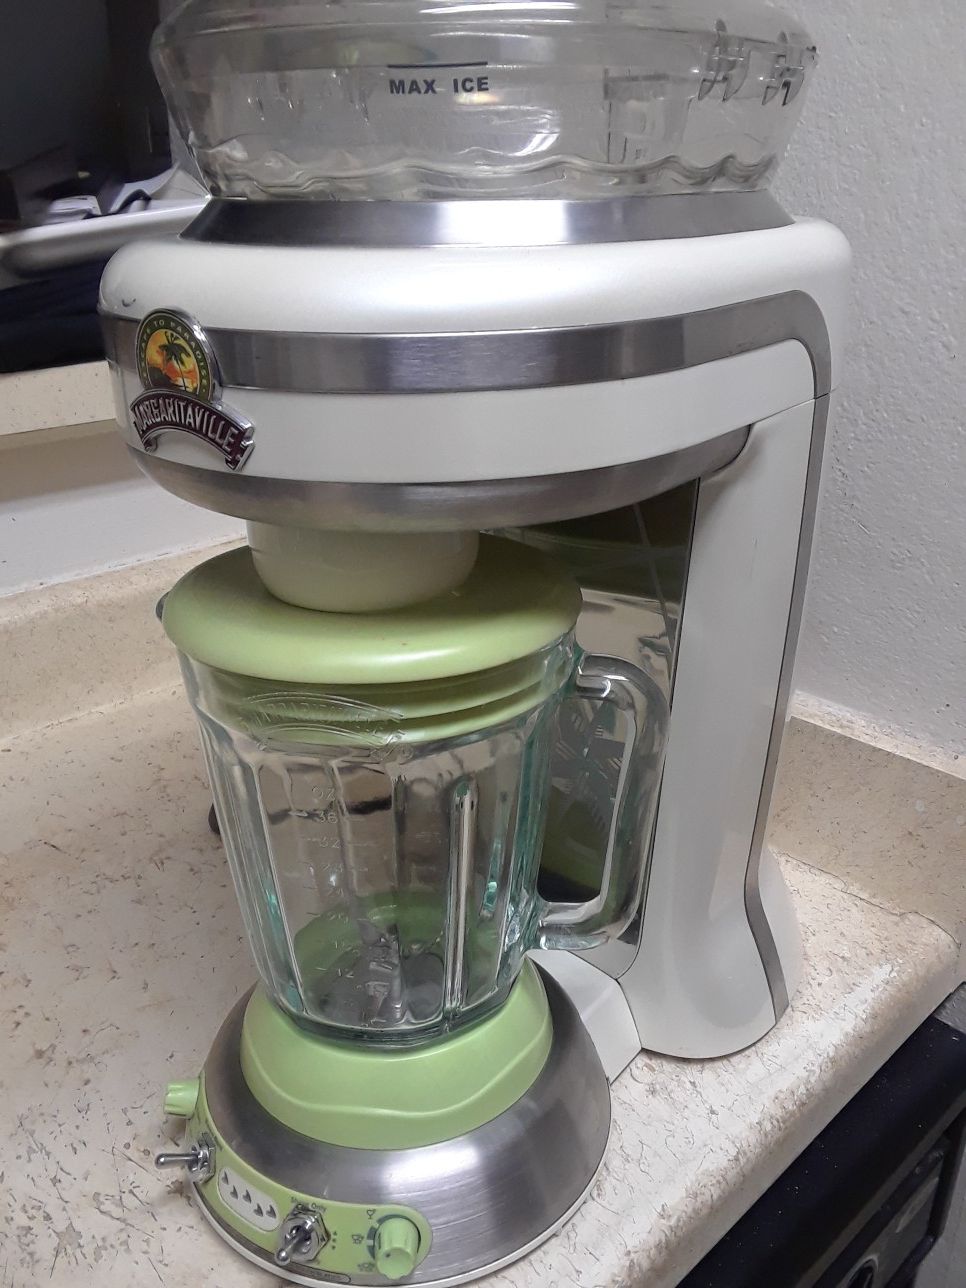 MARGARITAVILLE MARGARITA MIXER BLENDER. USED ONLY A FEW TIMES. STILL IN NEW CONDITION